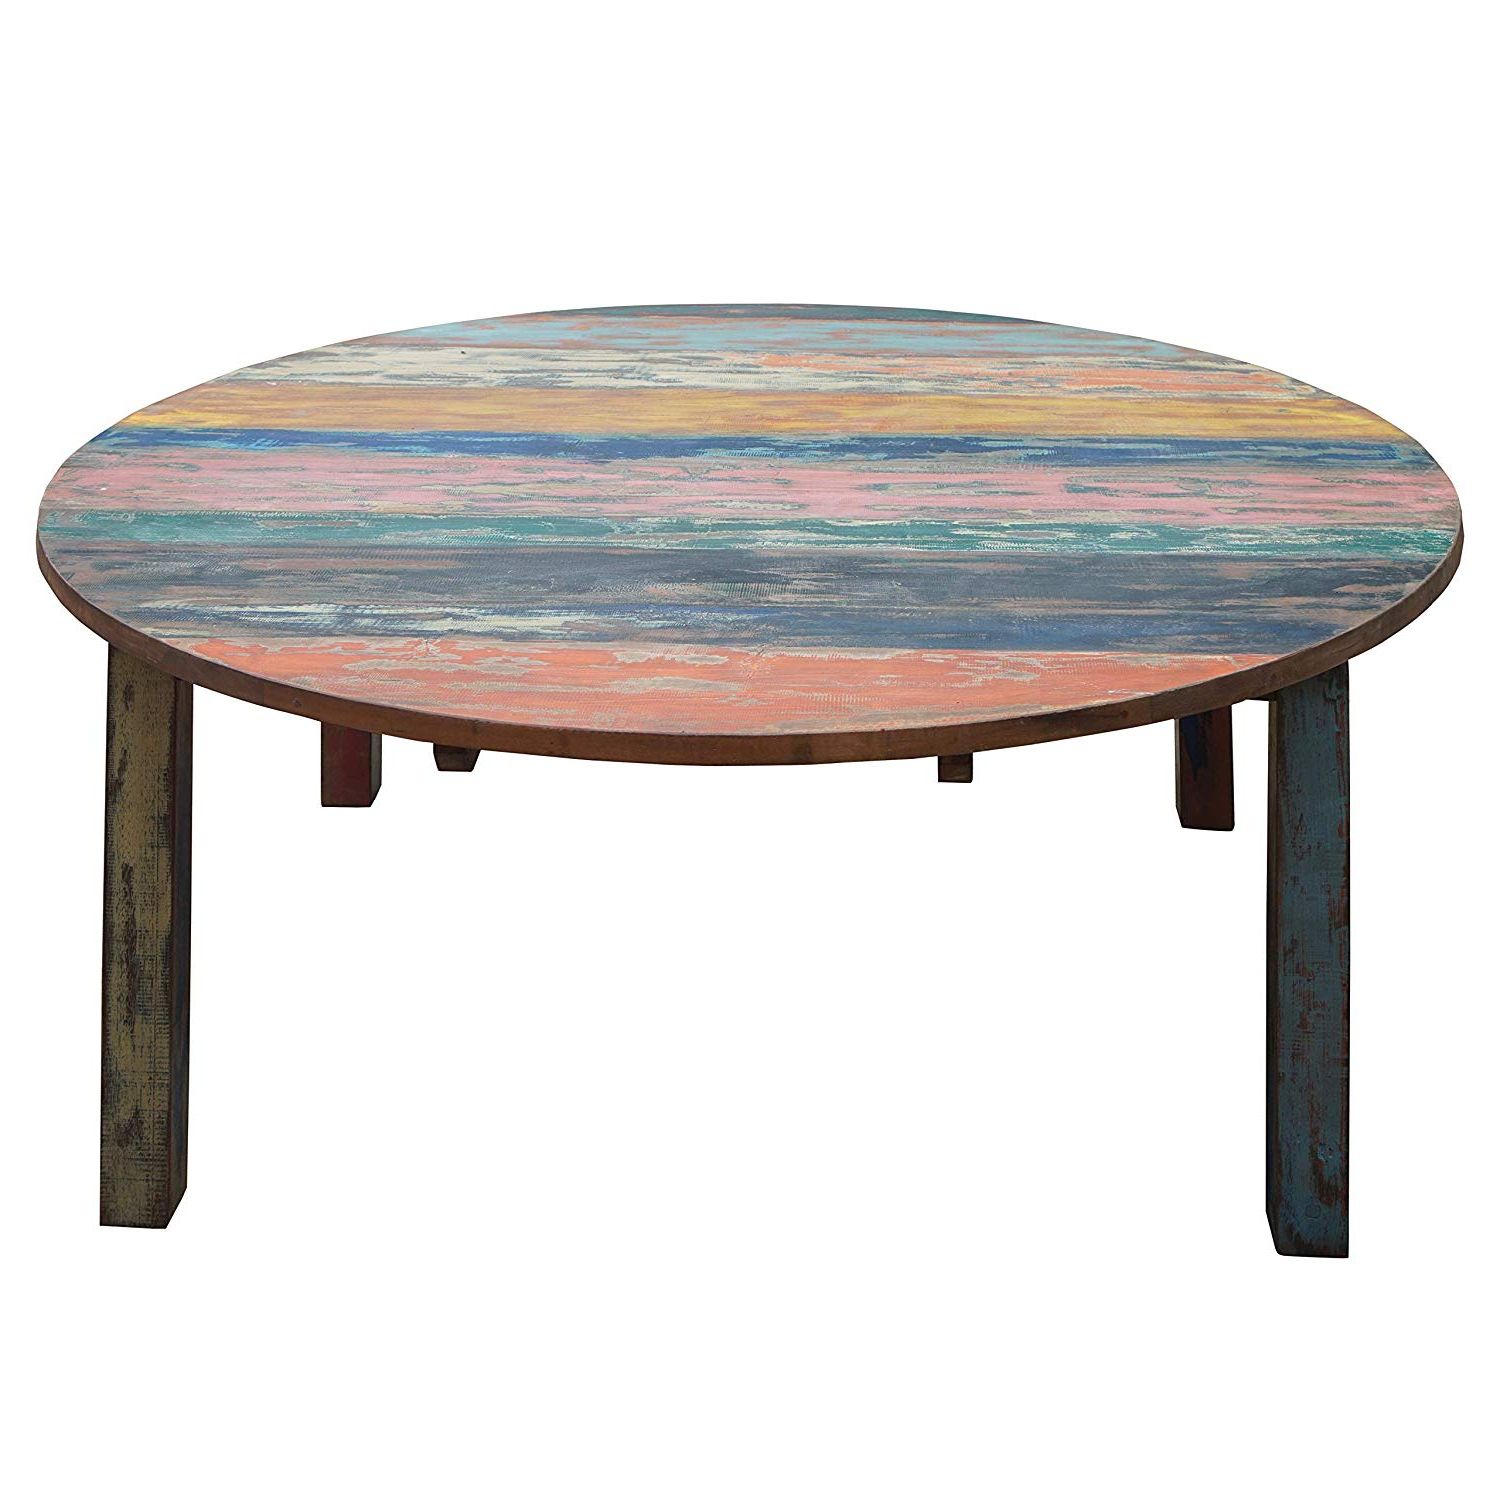 Preferred Amazon : Round Dining Table Made From Recycled Teak Wood Inside Small Round Dining Tables With Reclaimed Wood (View 14 of 30)